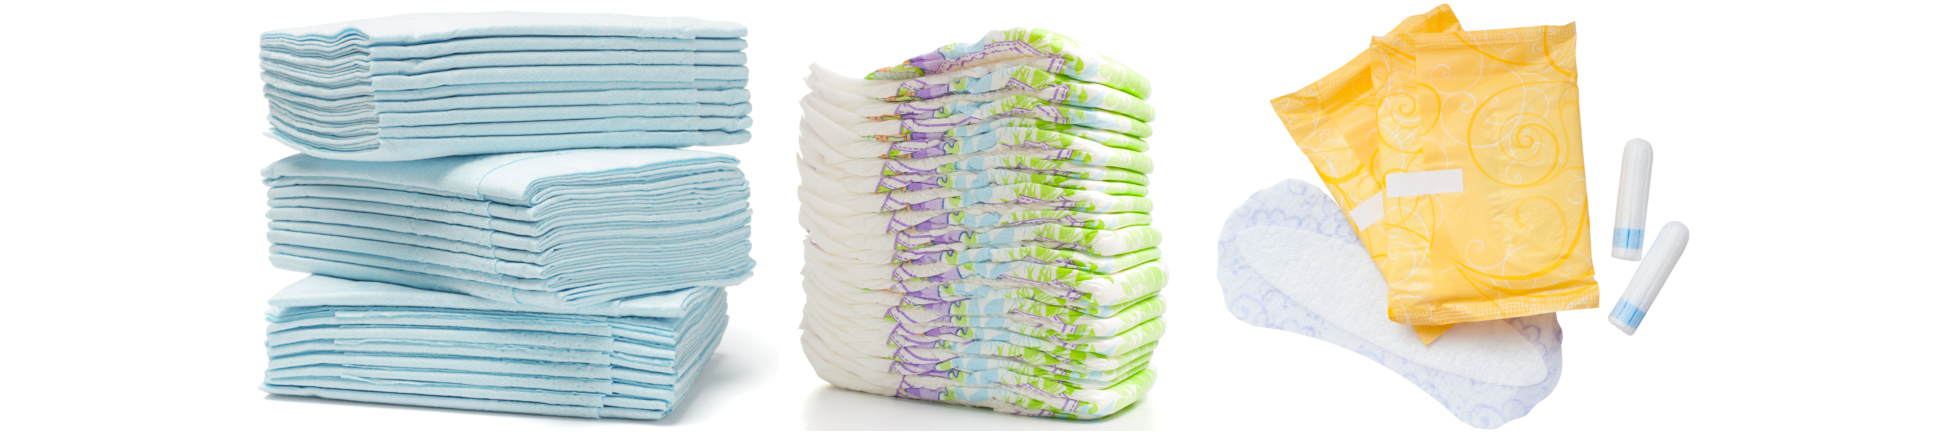 Folded tissue, stack of diapers, tampons and napkins